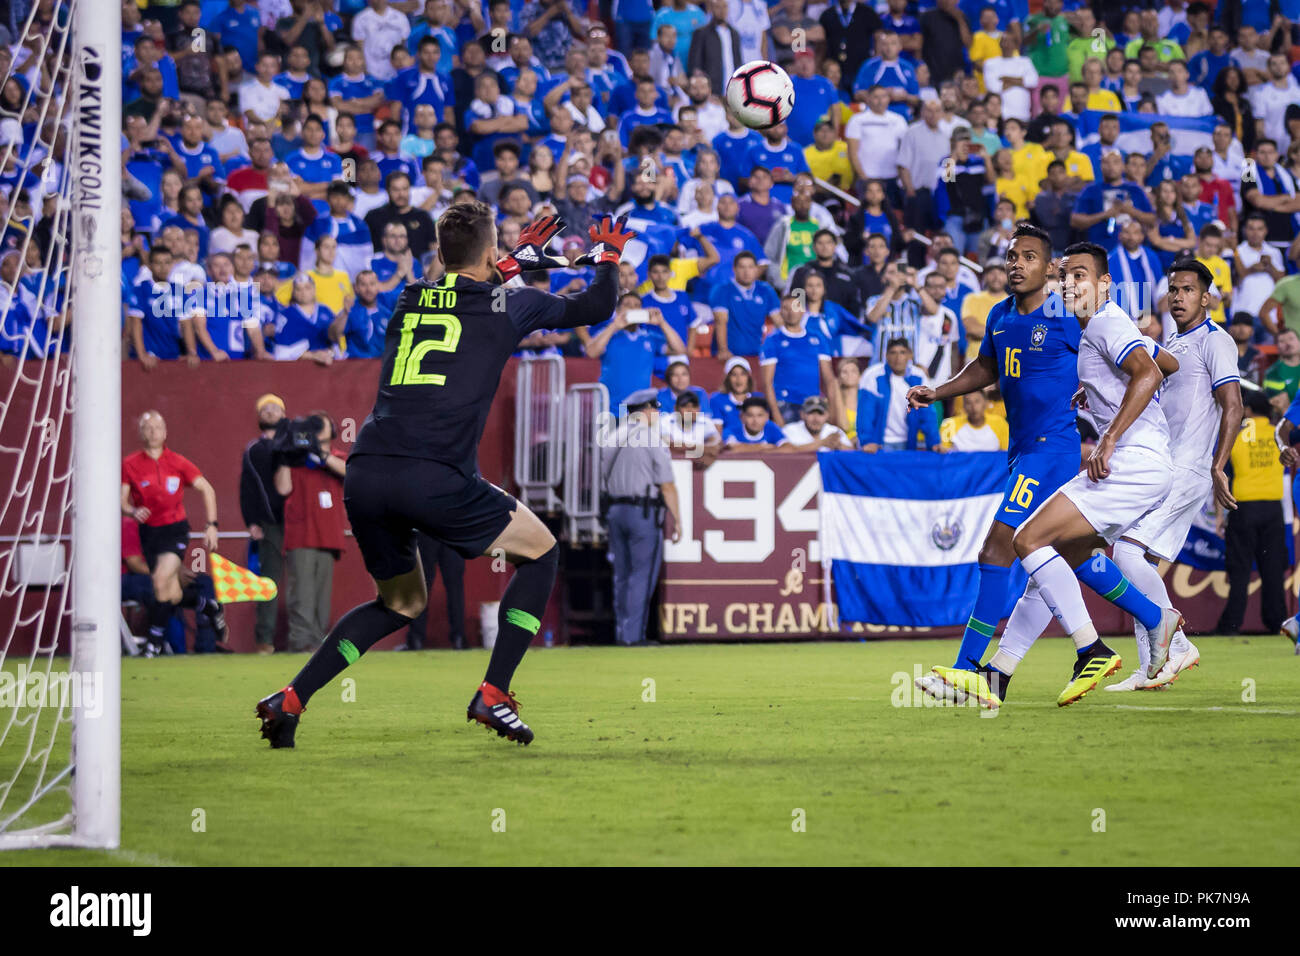 Landover, Maryland, USA. 11th Sep, 2018. Brazil goalkeeper Neto (12) makes a save during the second half of an International Friendly match between Brazil and El Salvador at FedExField in Landover, Maryland. Scott Taetsch/CSM/Alamy Live News Stock Photo